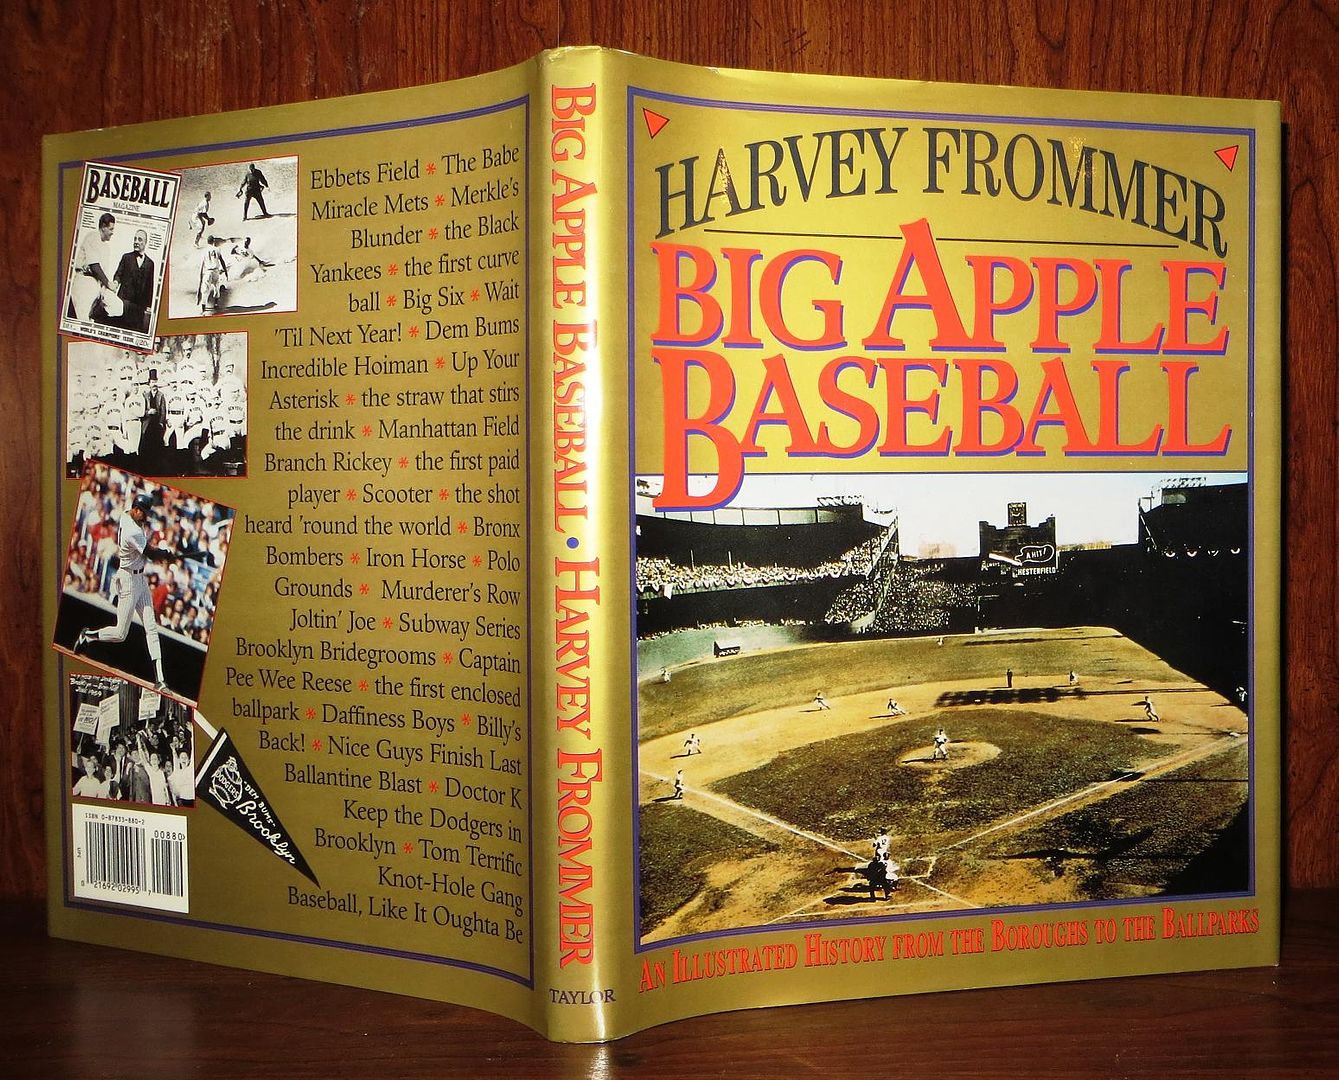 FROMMER, HARVEY - Big Apple Baseball an Illustrated History from the Boroughs to the Ballparks